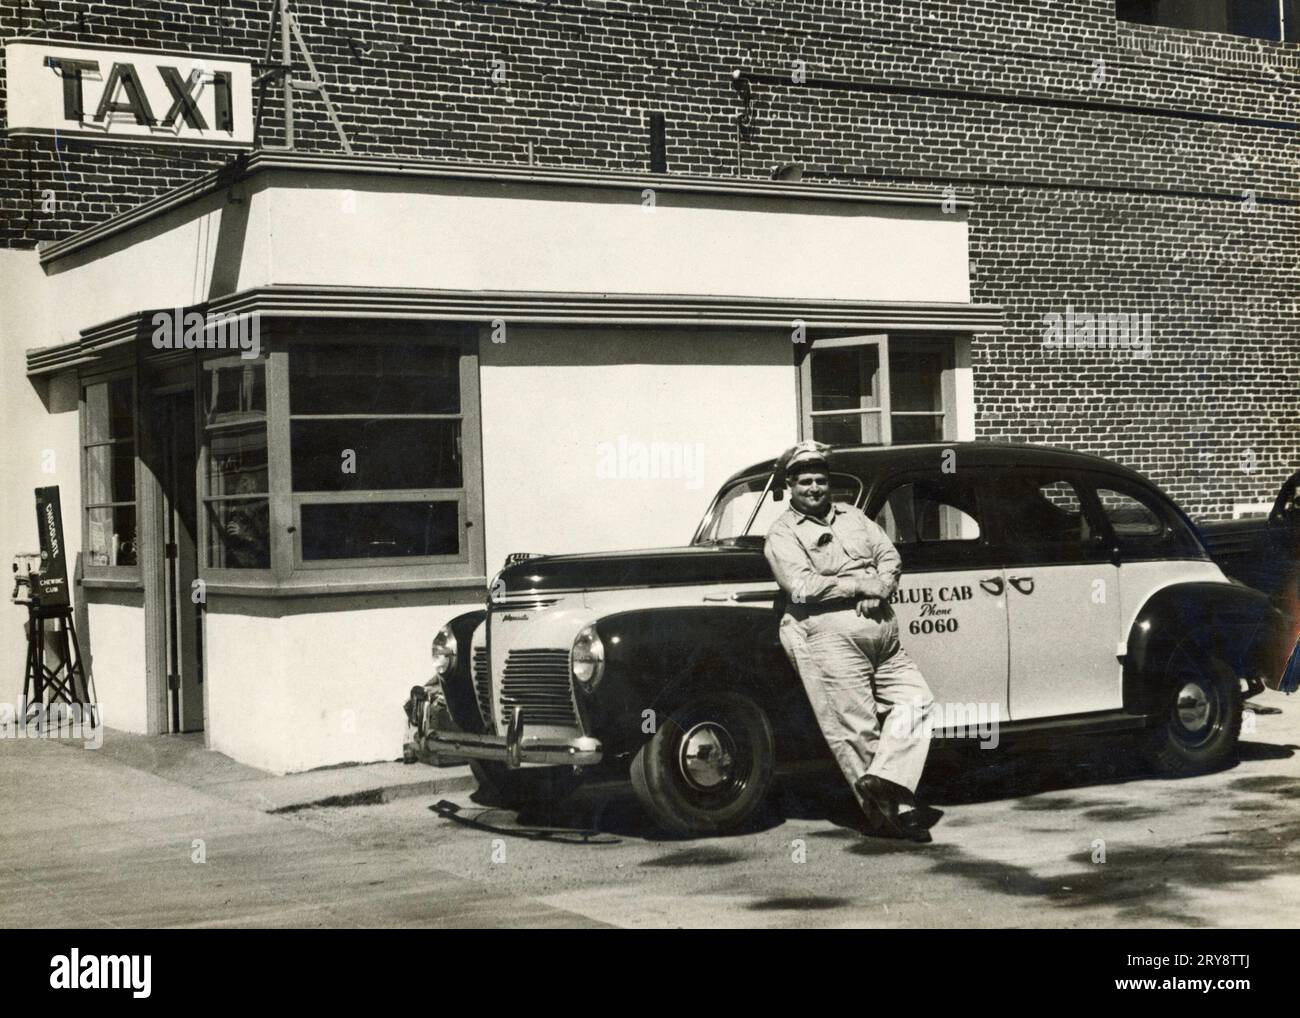 1950s taxi, Vintage taxi Cab Foto Stock